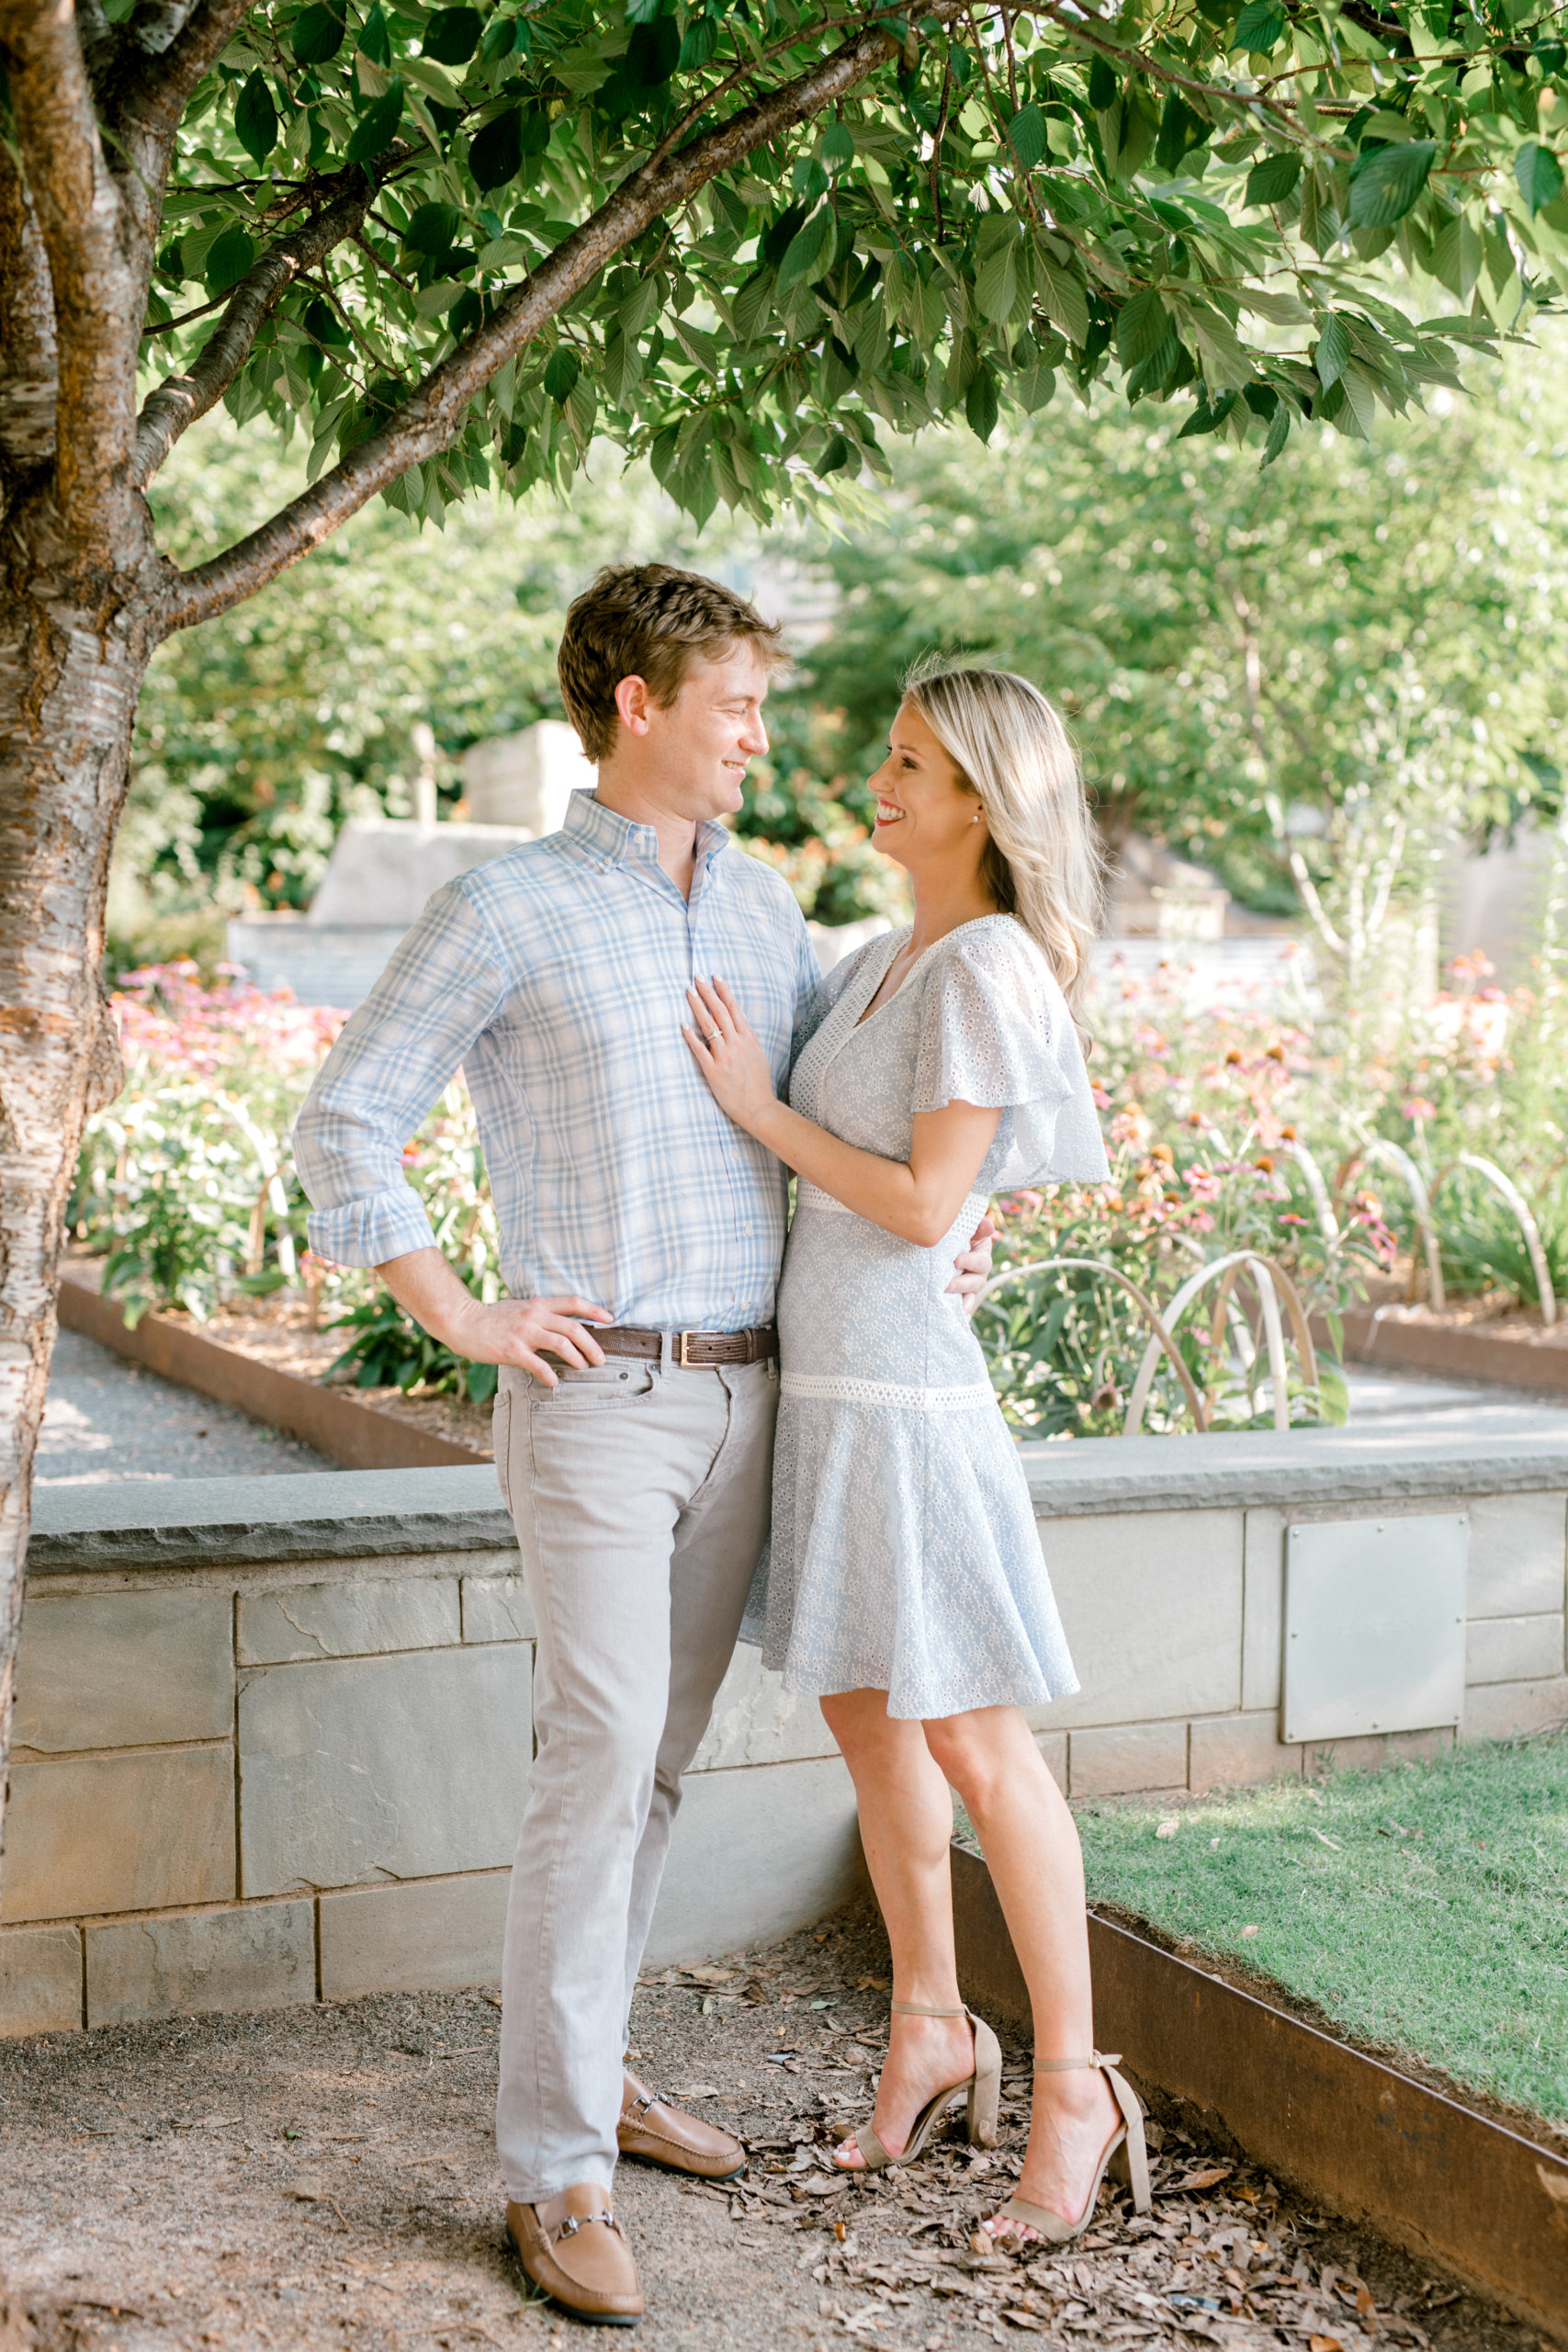 Couple smiling outside under tree wearing dusty blue and neutral outfits